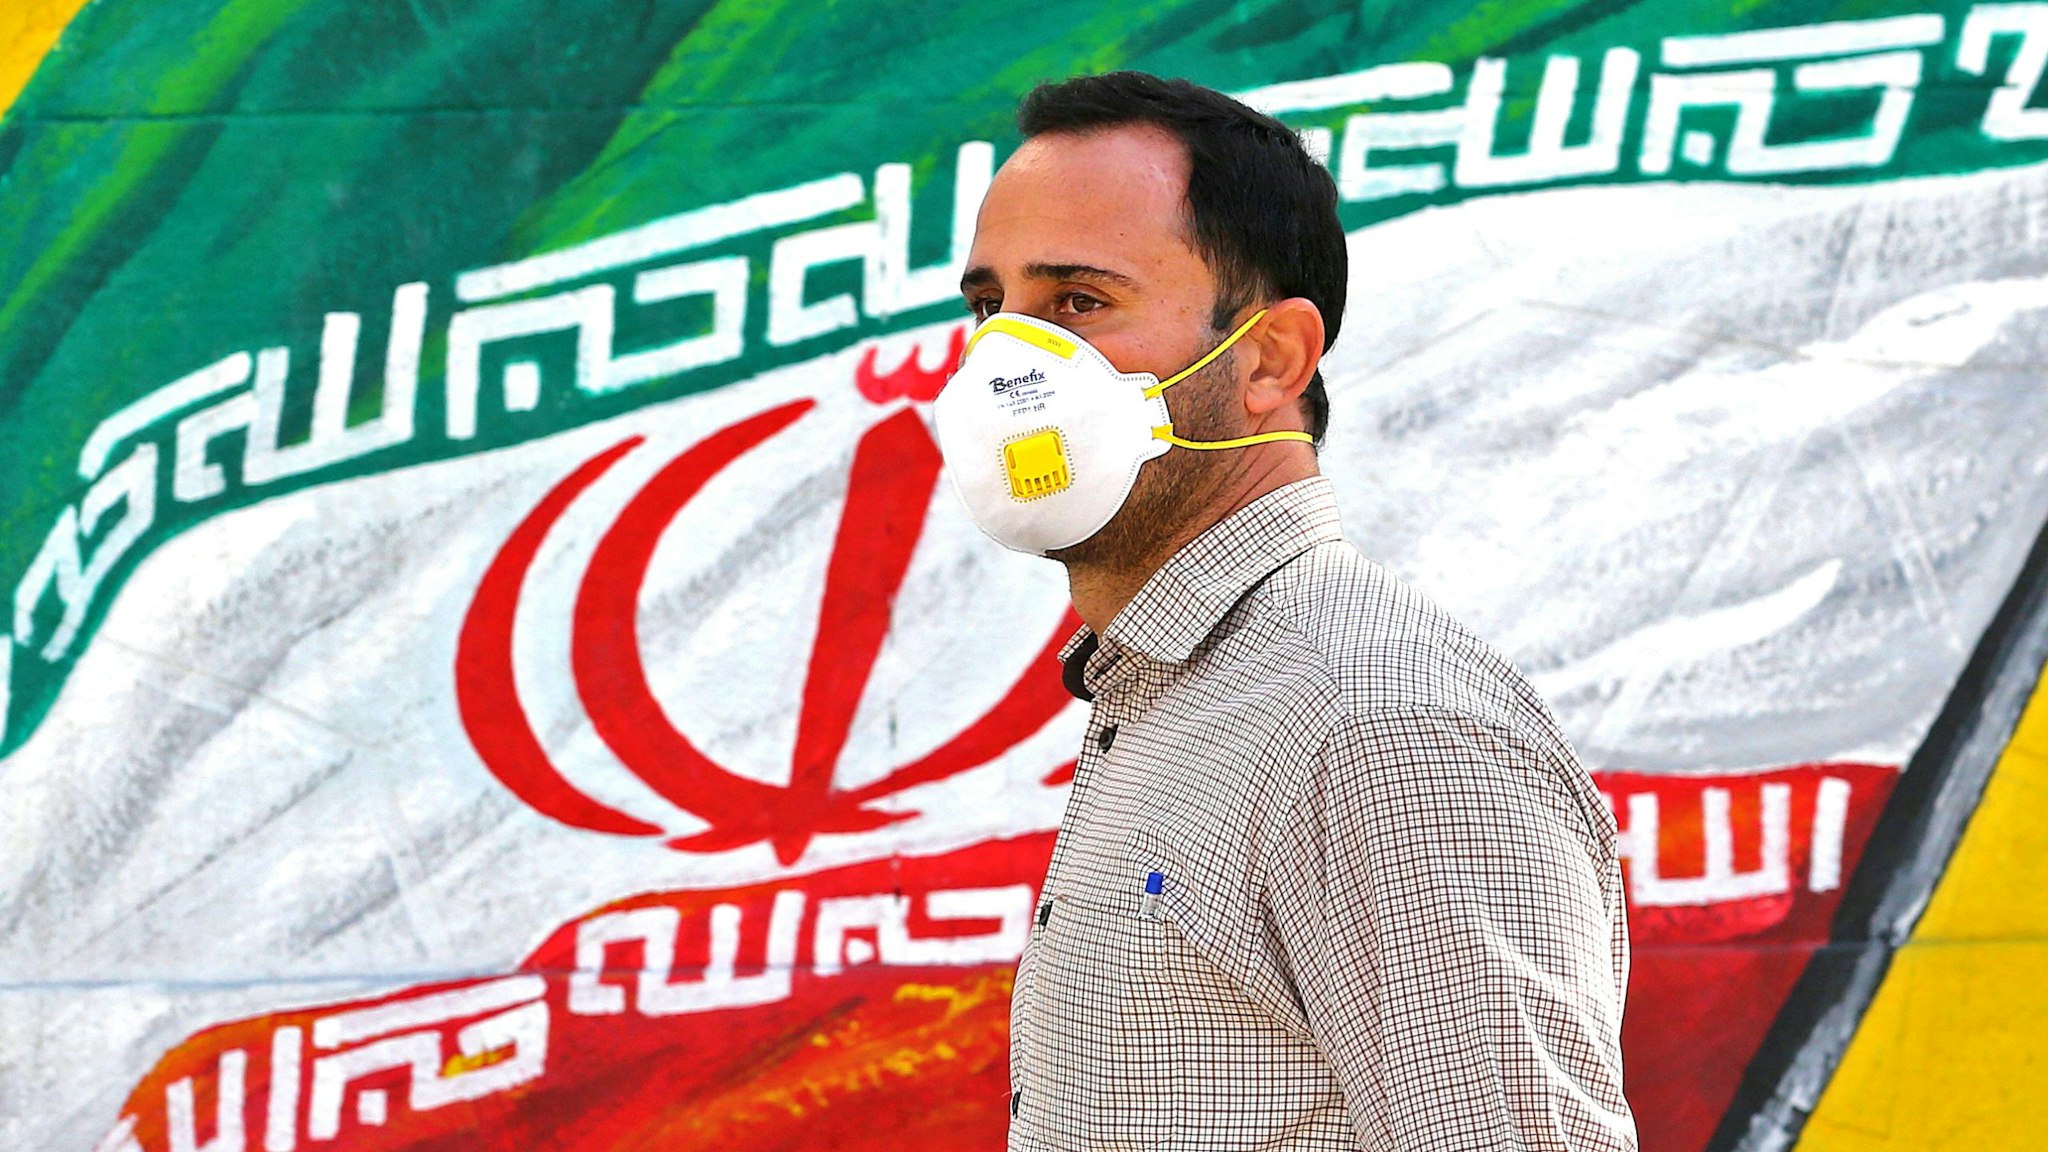 An Iranian man wearing a mask walks past a mural displaying his national flag in Tehran on March 4, 2020. - Iran has scrambled to halt the rapid spread of the COVID-19 virus, shutting schools and universities, suspending major cultural and sporting events, and cutting back on work hours.